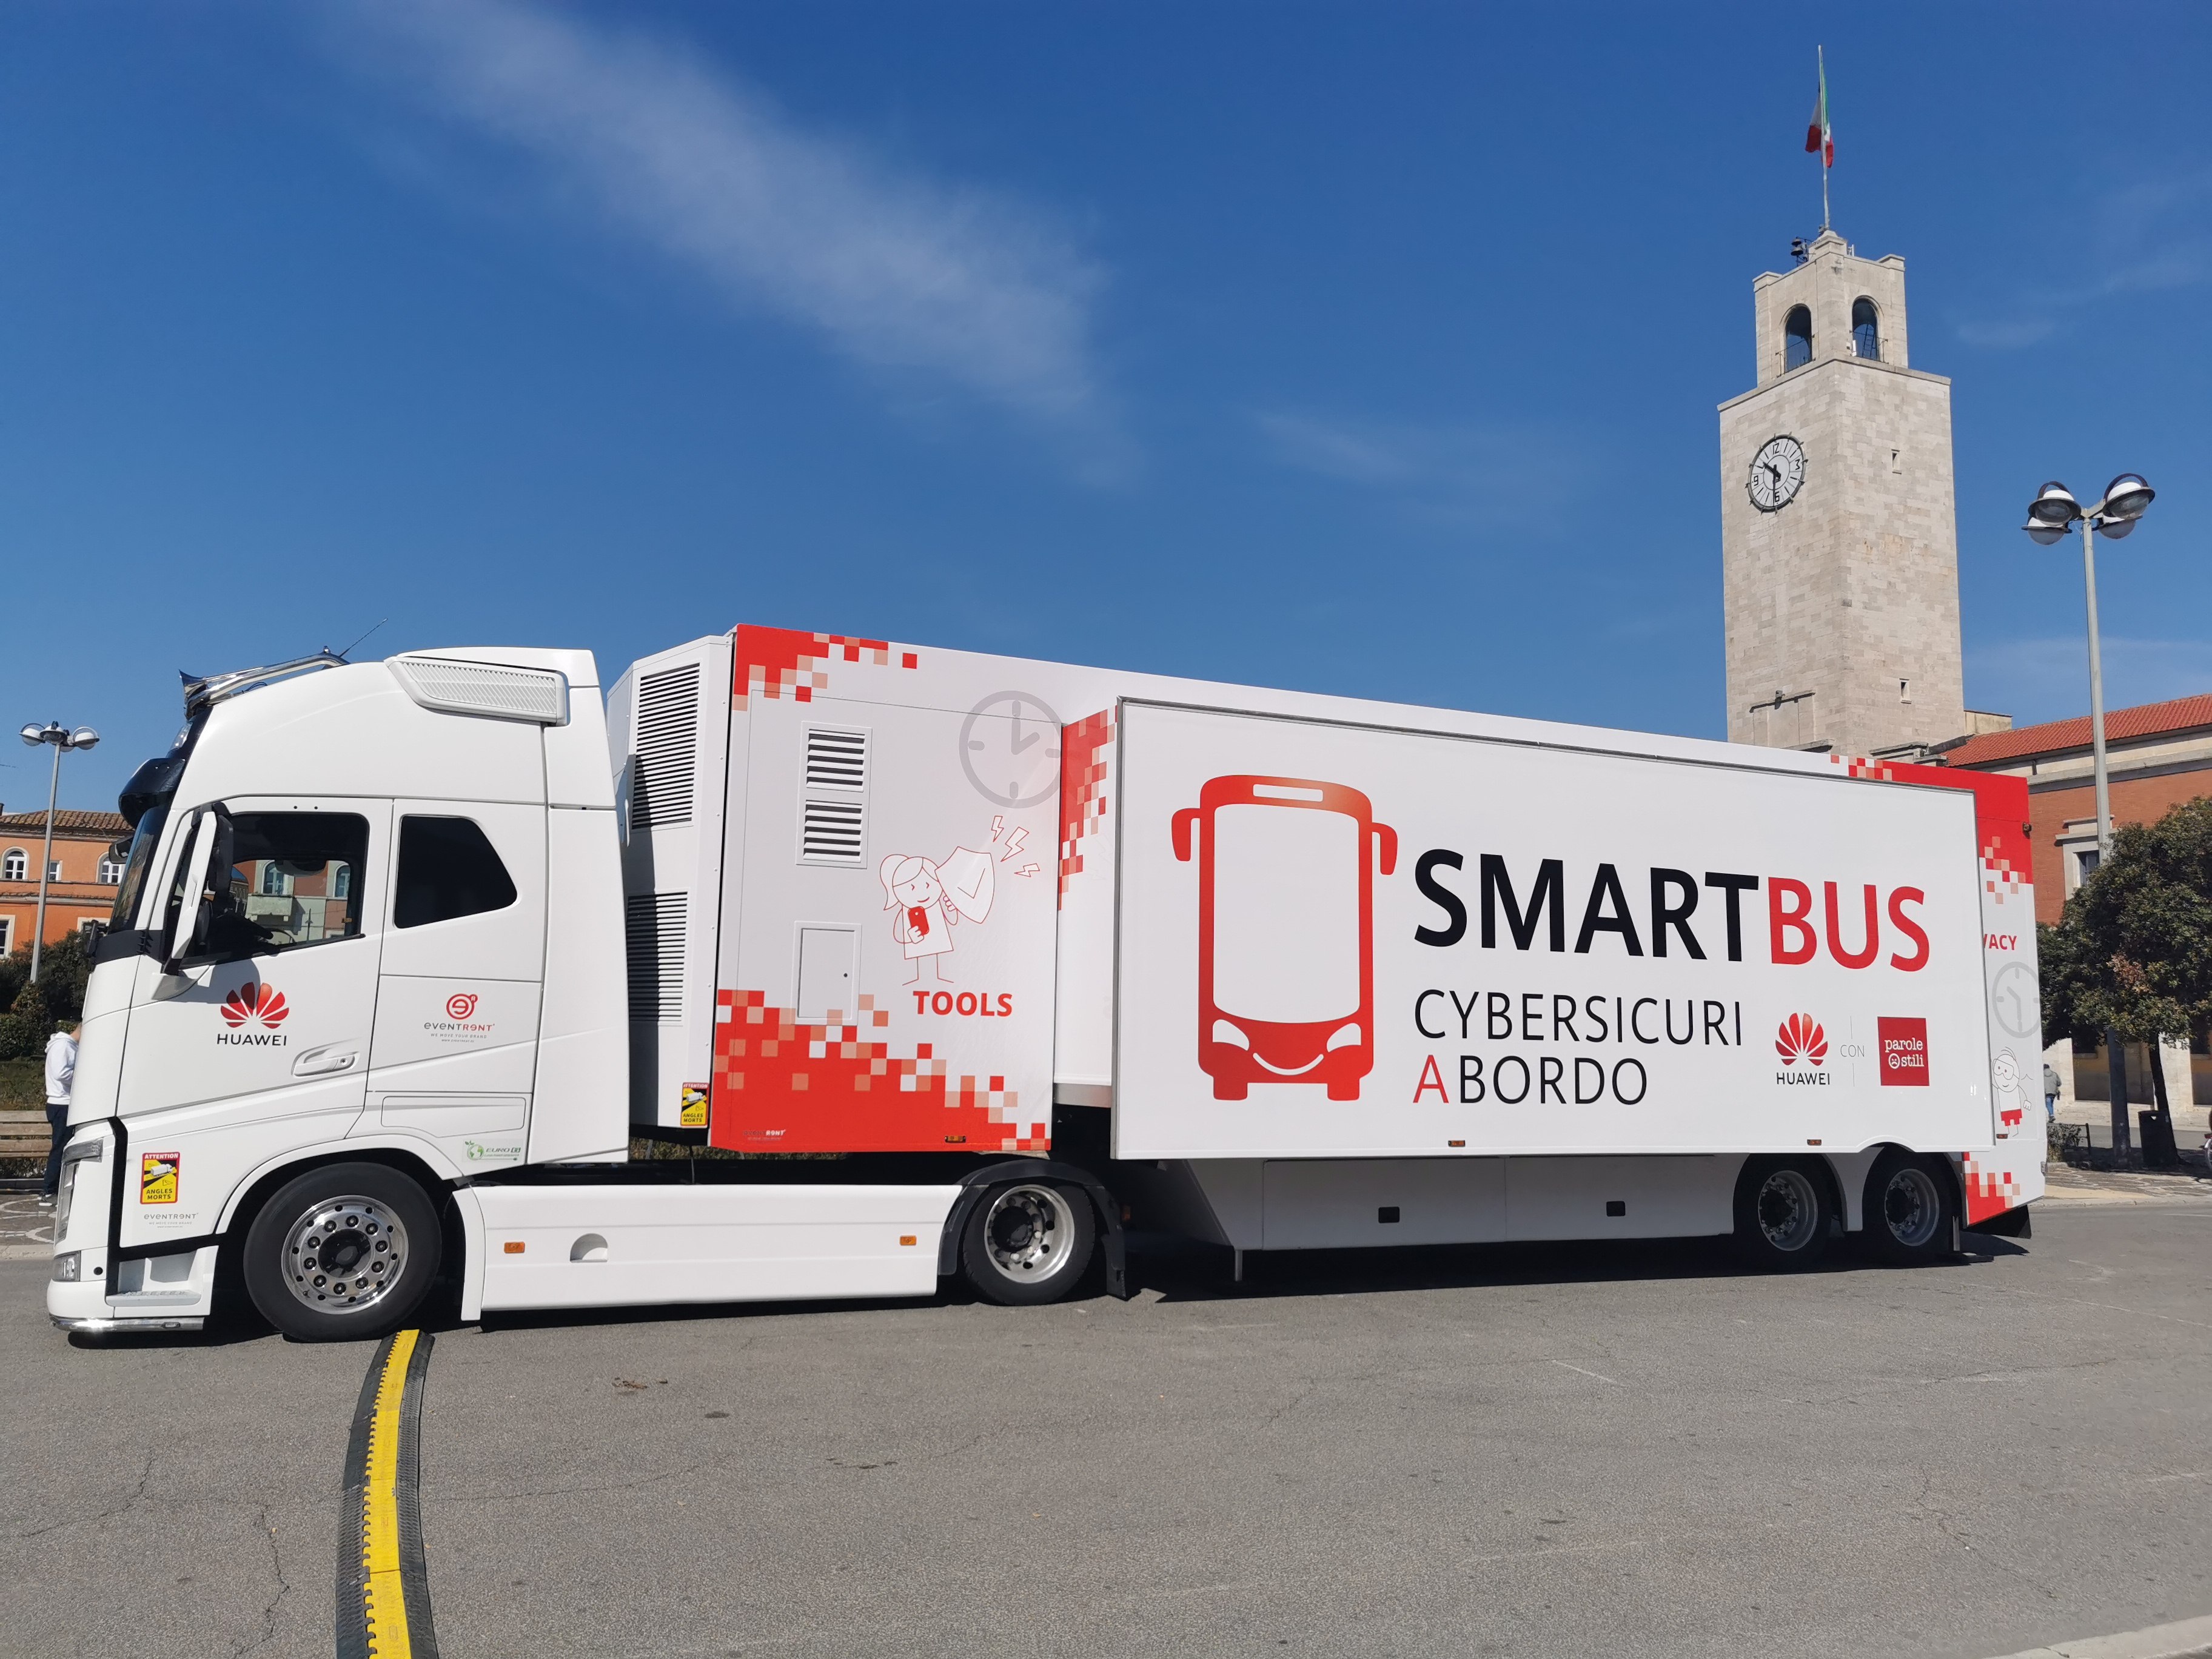 Huawei Italy’s SmartBus cybersecurity initiative, under the theme of ‘Cybersafe on Board’, featured a 90-day road trip across Italy last year, which interacted with 4,500 children from 206 schools, as well as 600 adults.